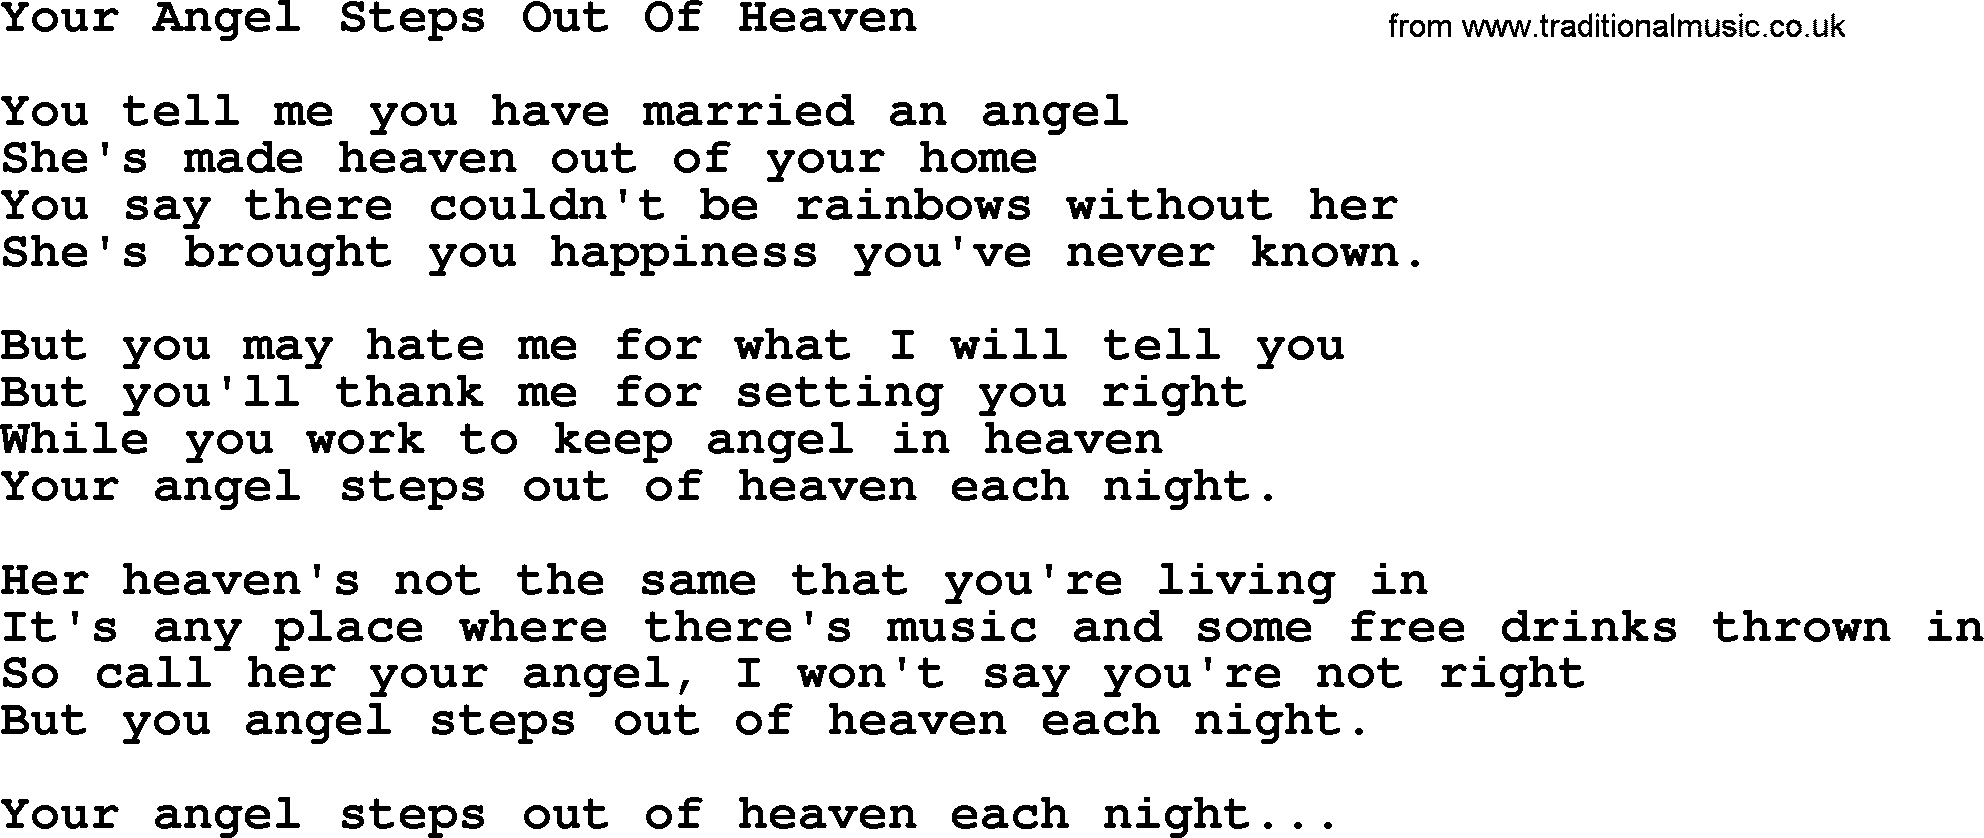 George Jones song: Your Angel Steps Out Of Heaven, lyrics